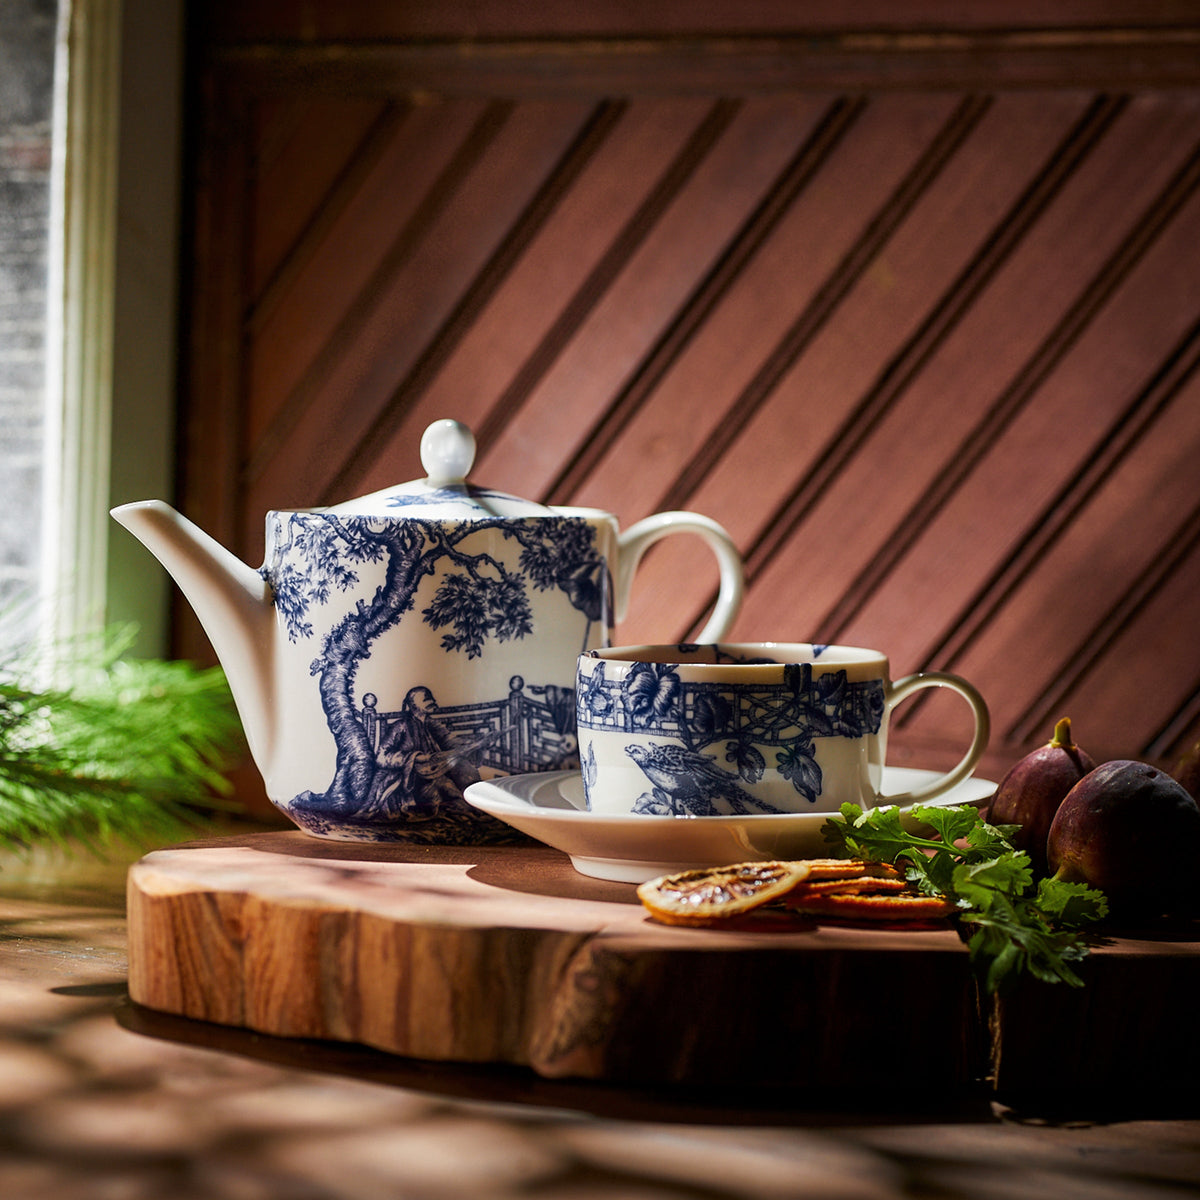 A Chinoiserie Toile Petite Teapot by Caskata sits on a wooden cutting board.